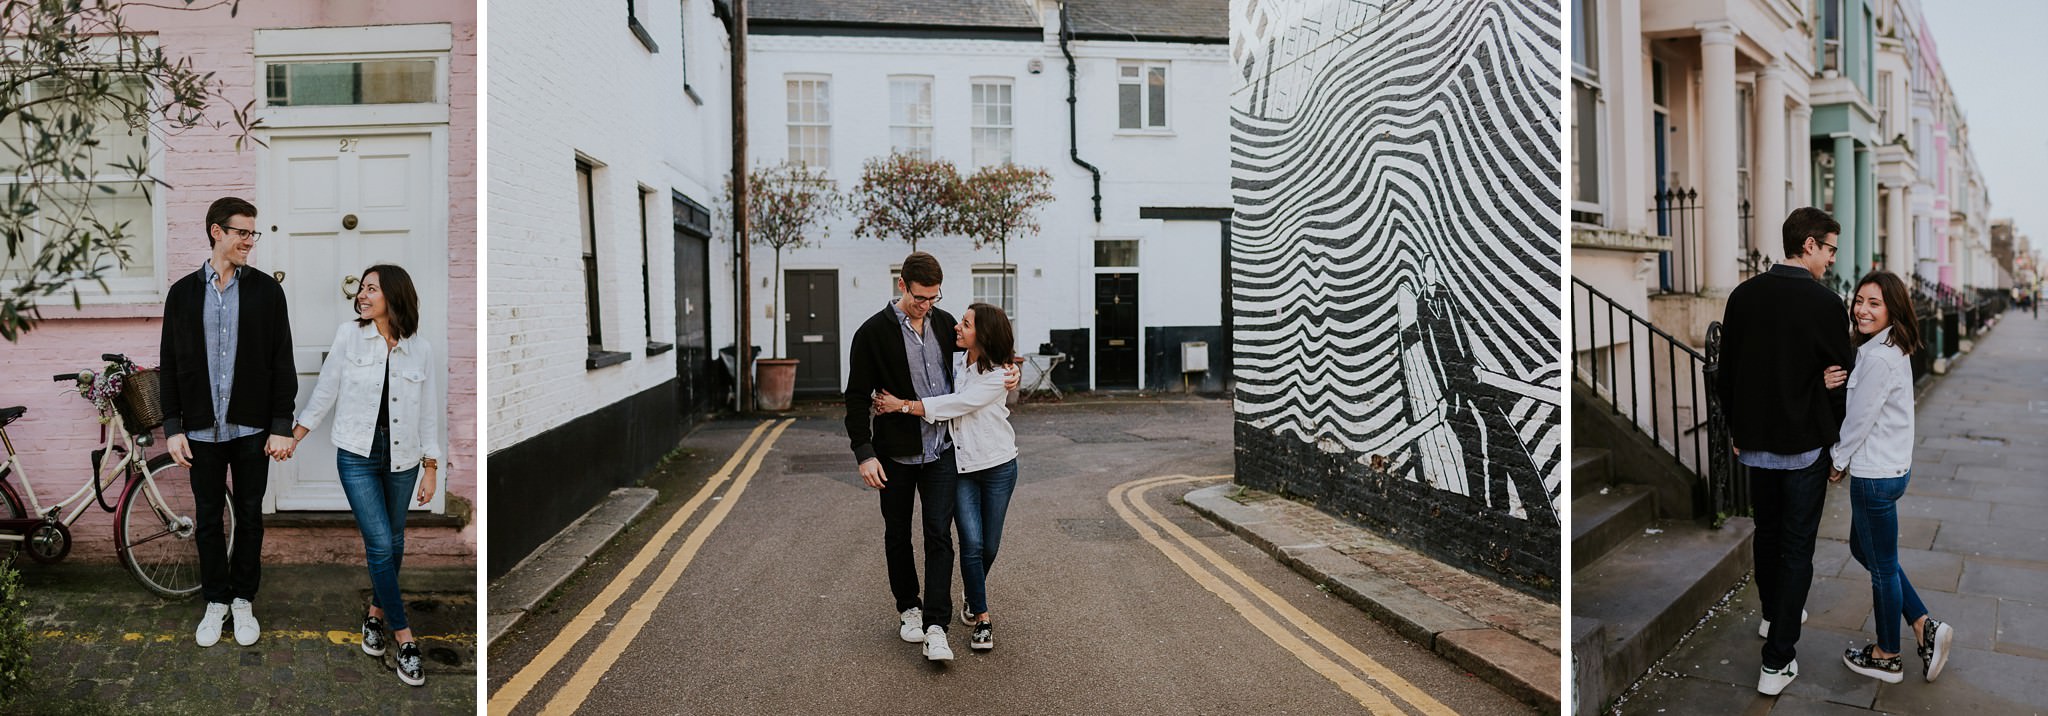 Engagement session in Notting Hill